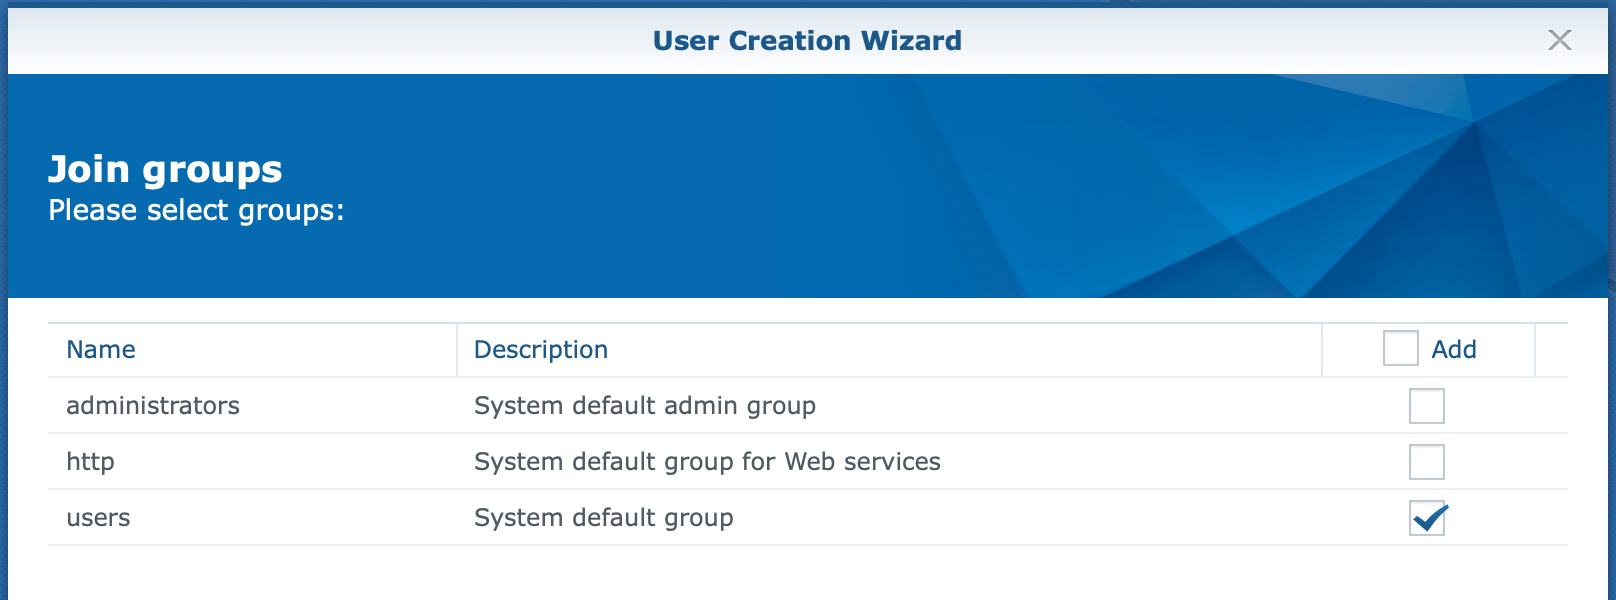 synology, user create wizard, join groups, dsm6